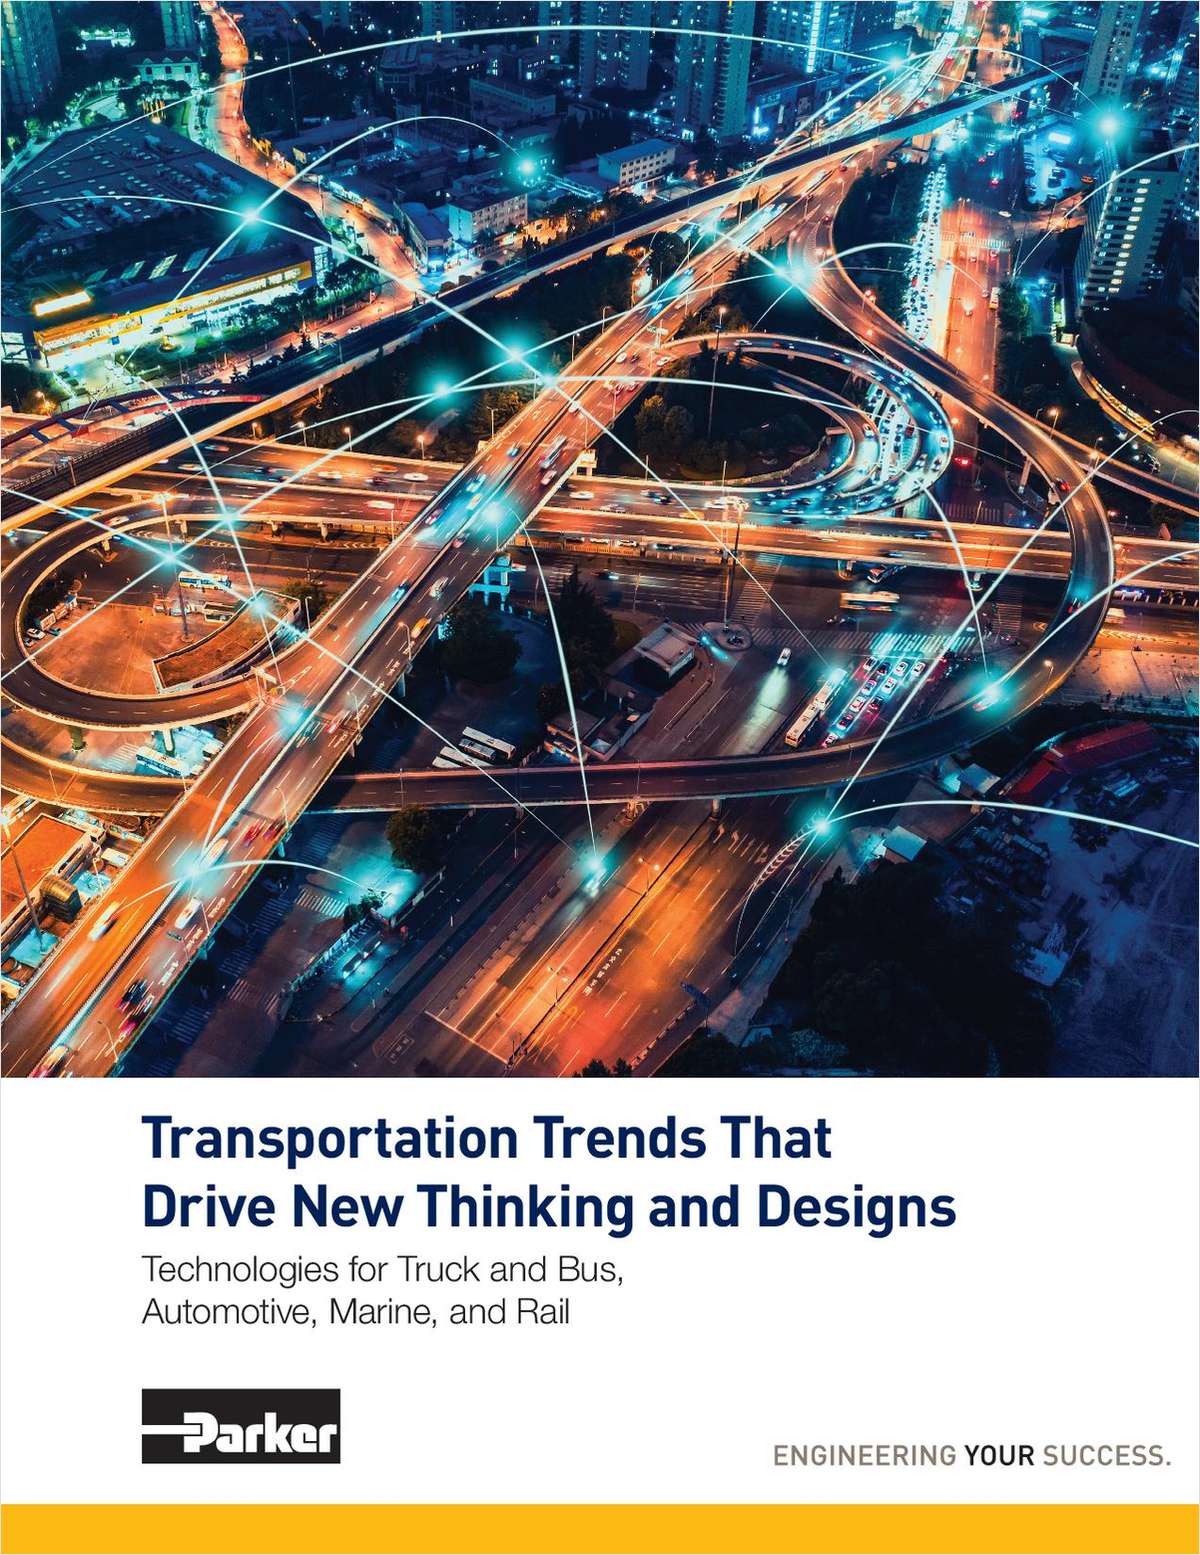 Transportation Trends That Drive New Thinking and Designs